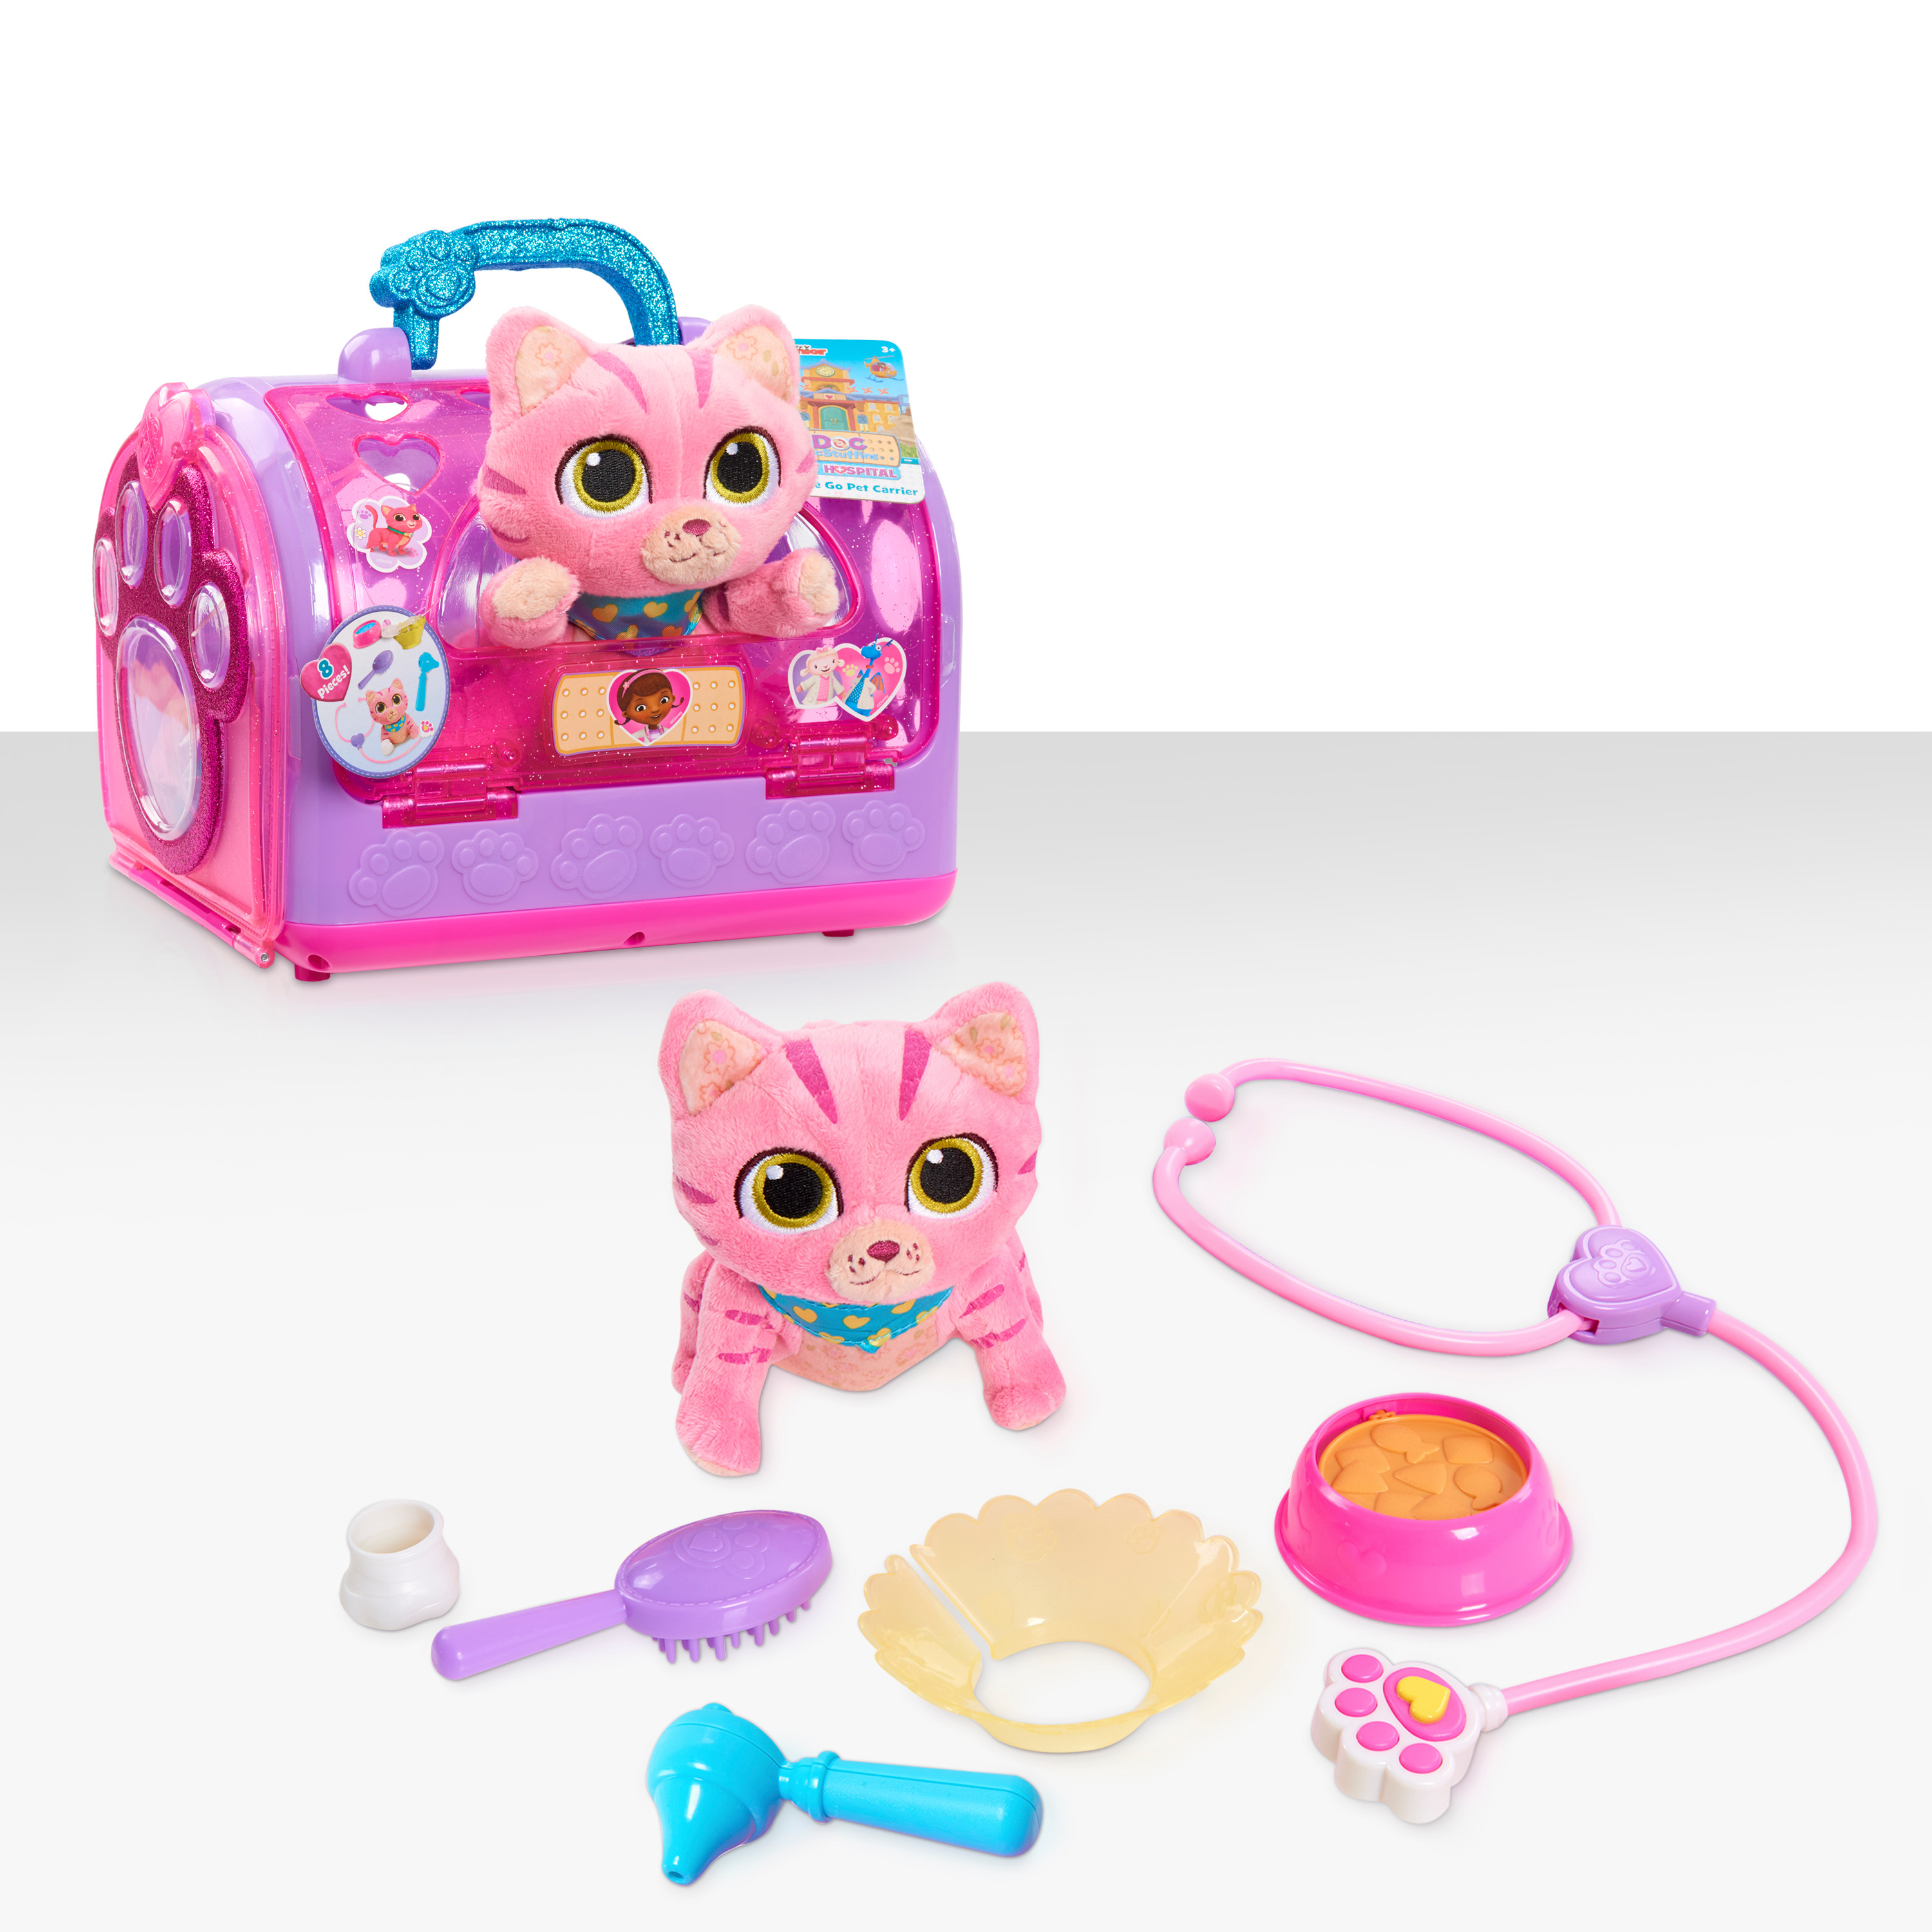 Doc McStuffins Pet Rescue On-the-Go Carrier, Whispers, Officially Licensed Kids Toys for Ages 3 Up, Gifts and Presents - image 1 of 8